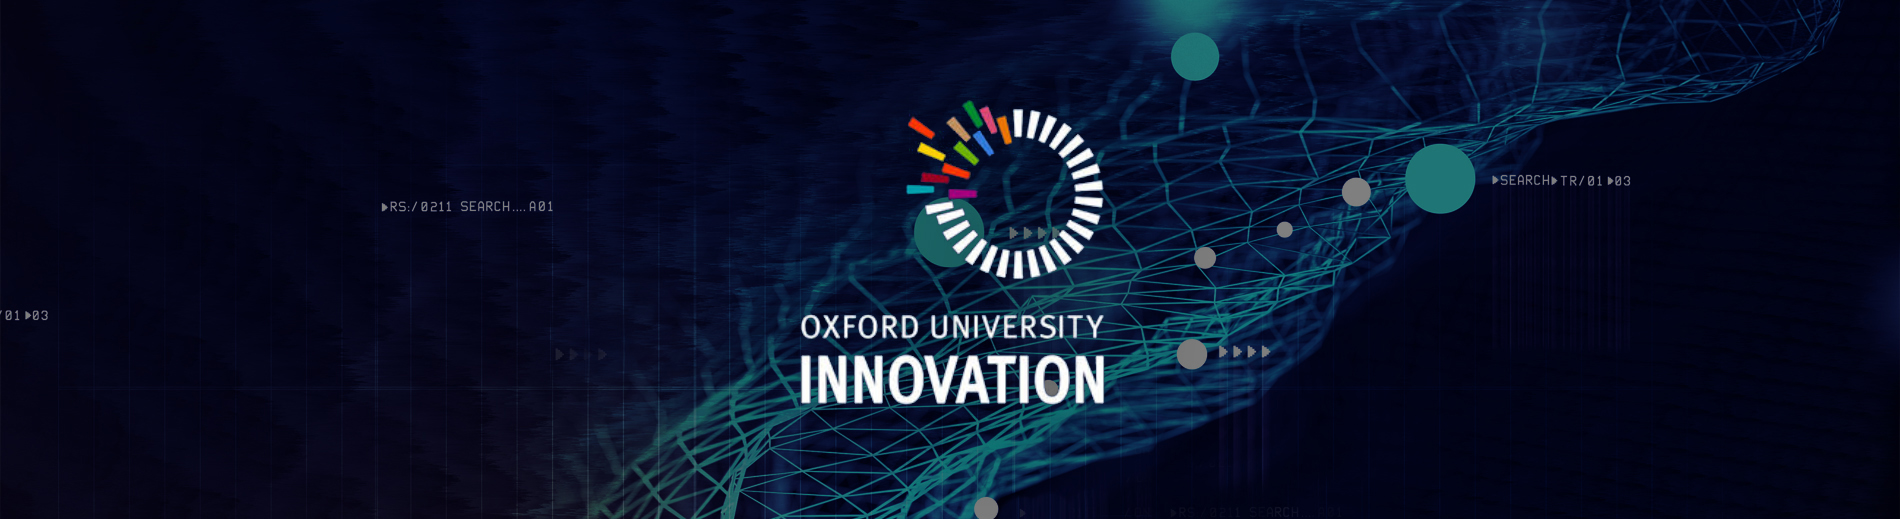  Oxford University Case Study title image for software development project